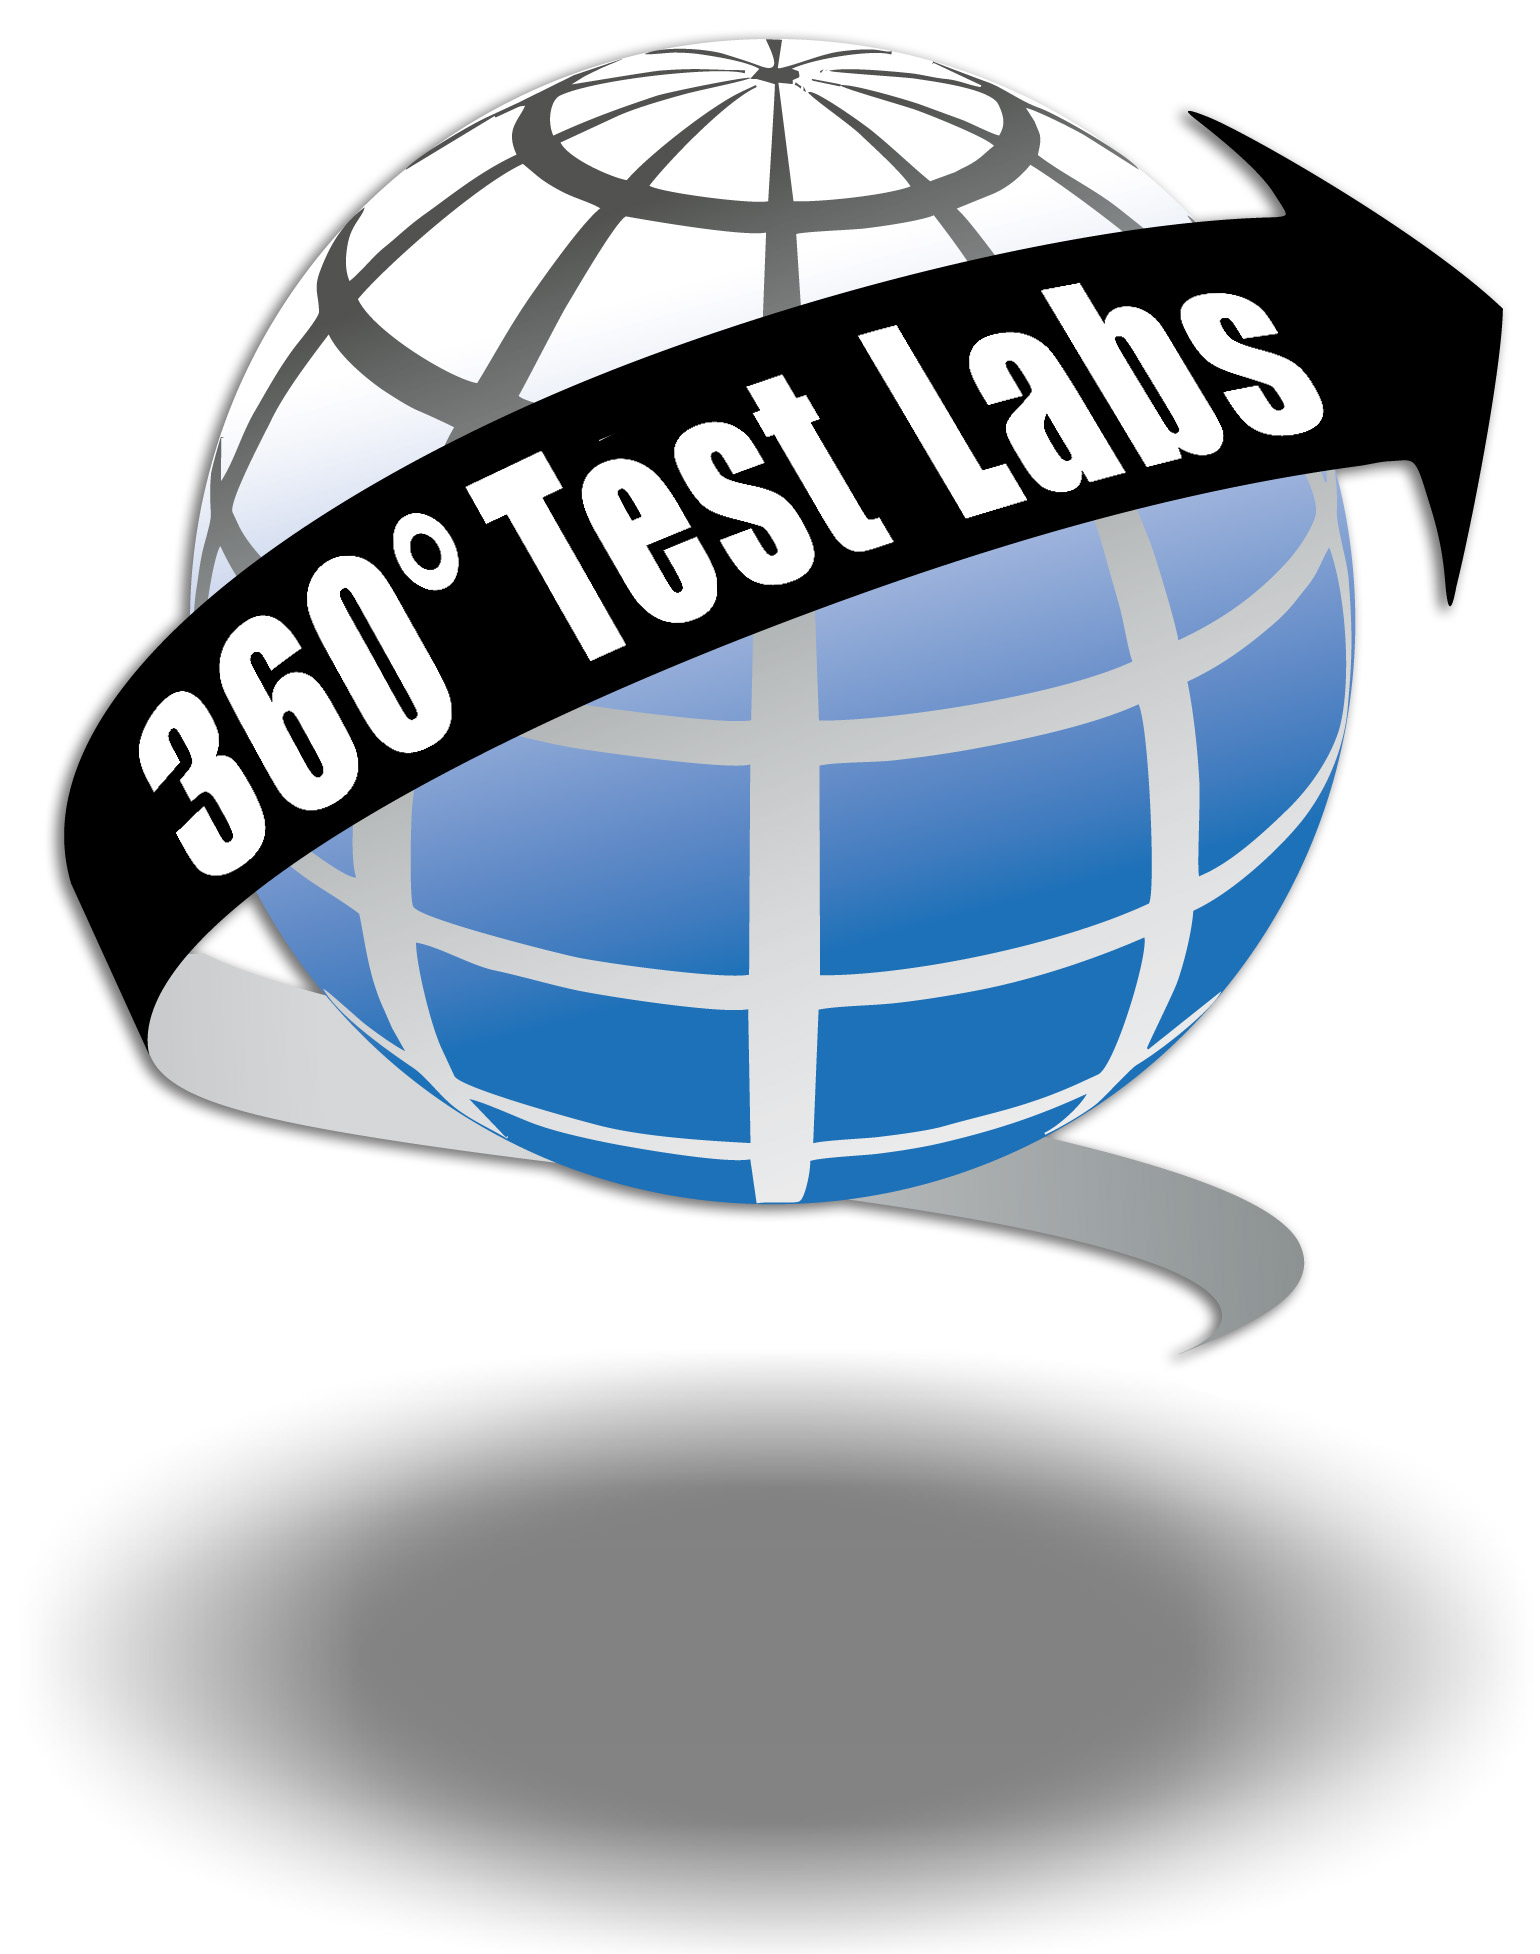 360° Test - Decades of testing experience combined with 360°'s accomplished product, electronic, mechanical, and